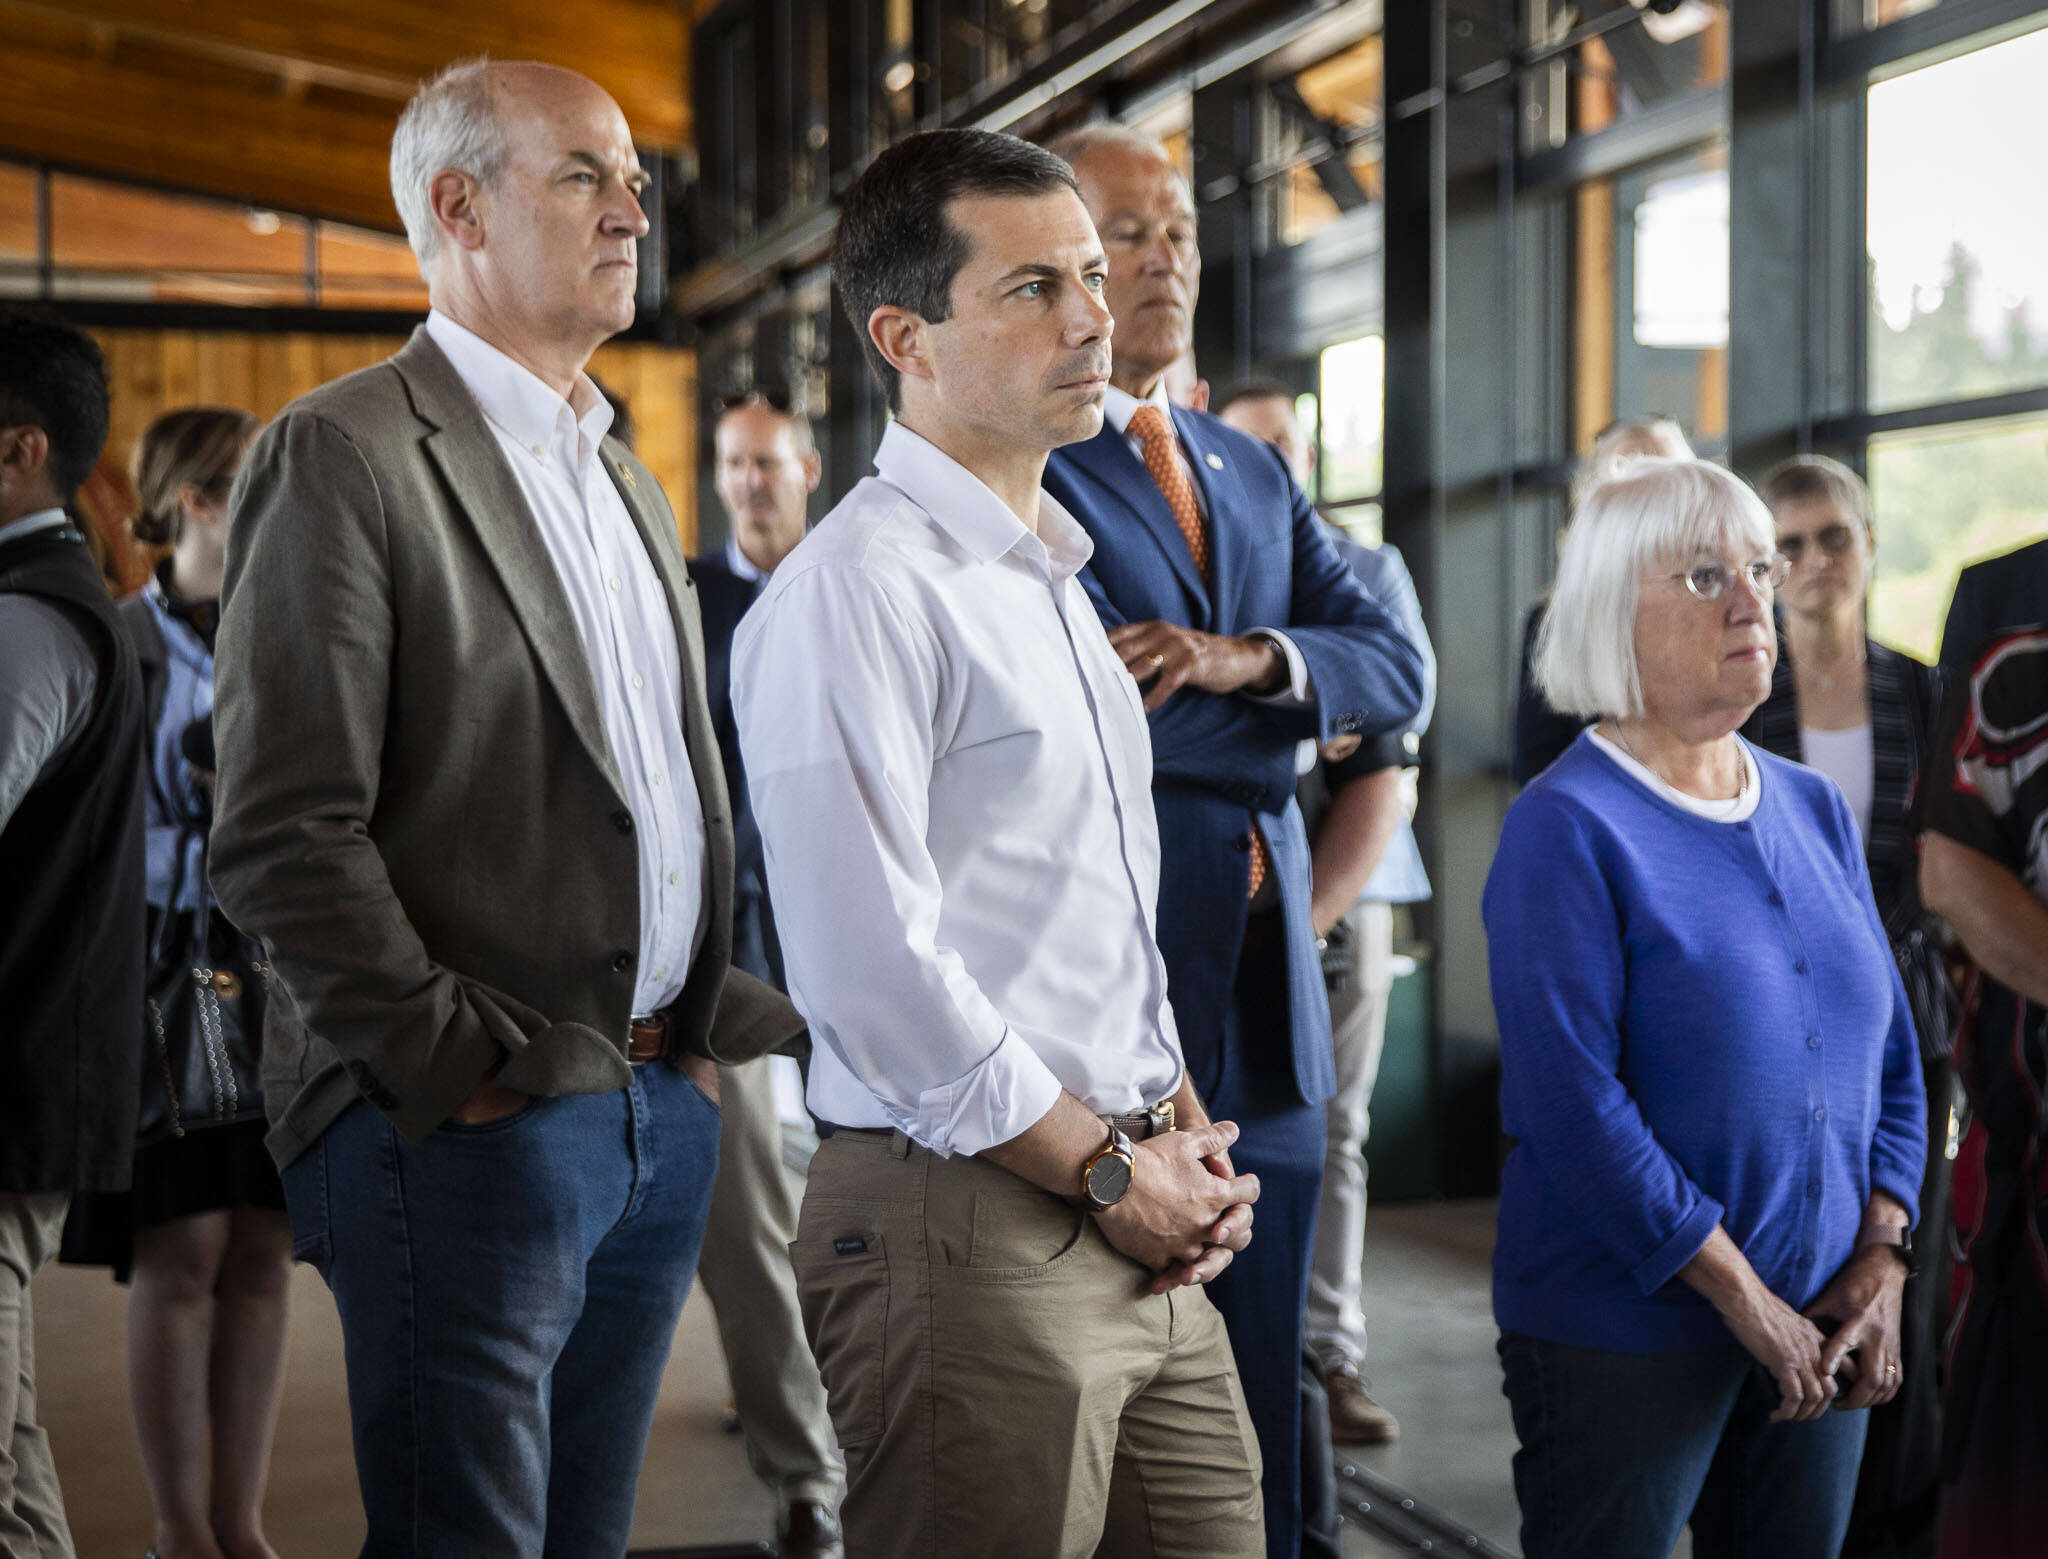 Olivia Vanni / The Herald
U.S. Transportation Secretary Pete Buttigieg is joined by U.S. Representative Rick Larsen, Governor Jay Inslee and Sen. Patty Murray while they listen to discussion about federal funds and State Ferries.